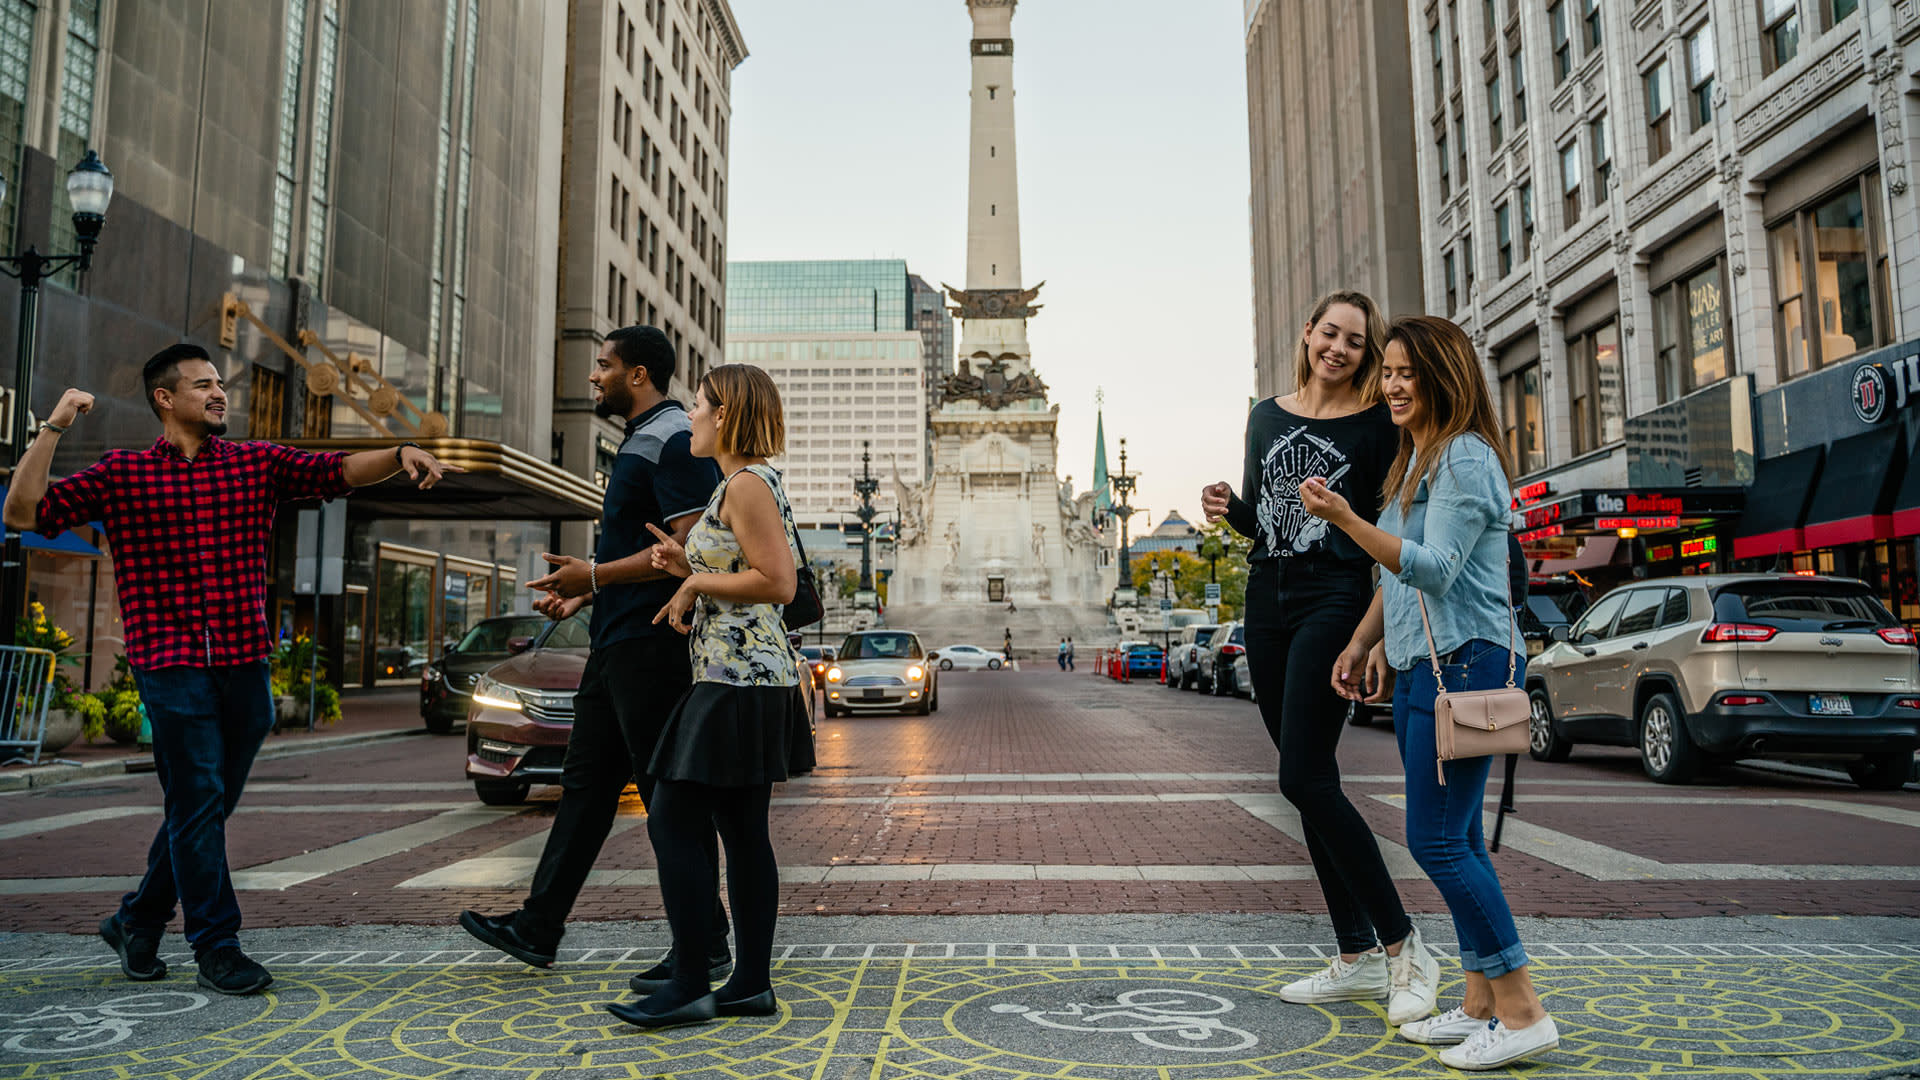 Monument Circle is the ultimate backdrop for urban adventures